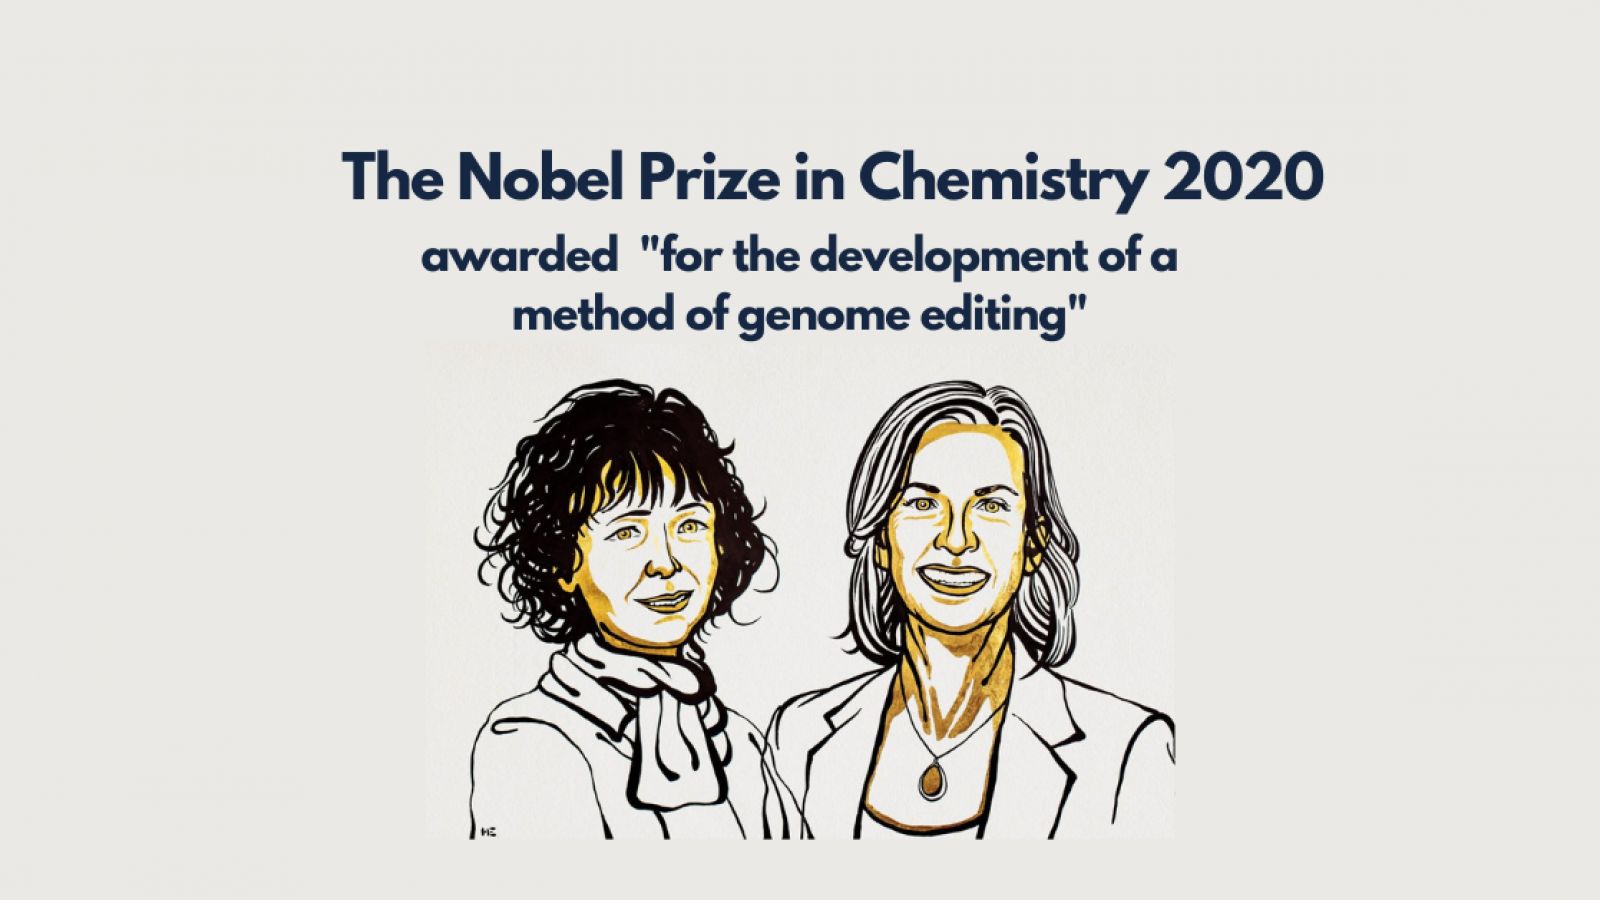 2020 Nobel Prize for Chemistry awarded for the development of a method for genome editing